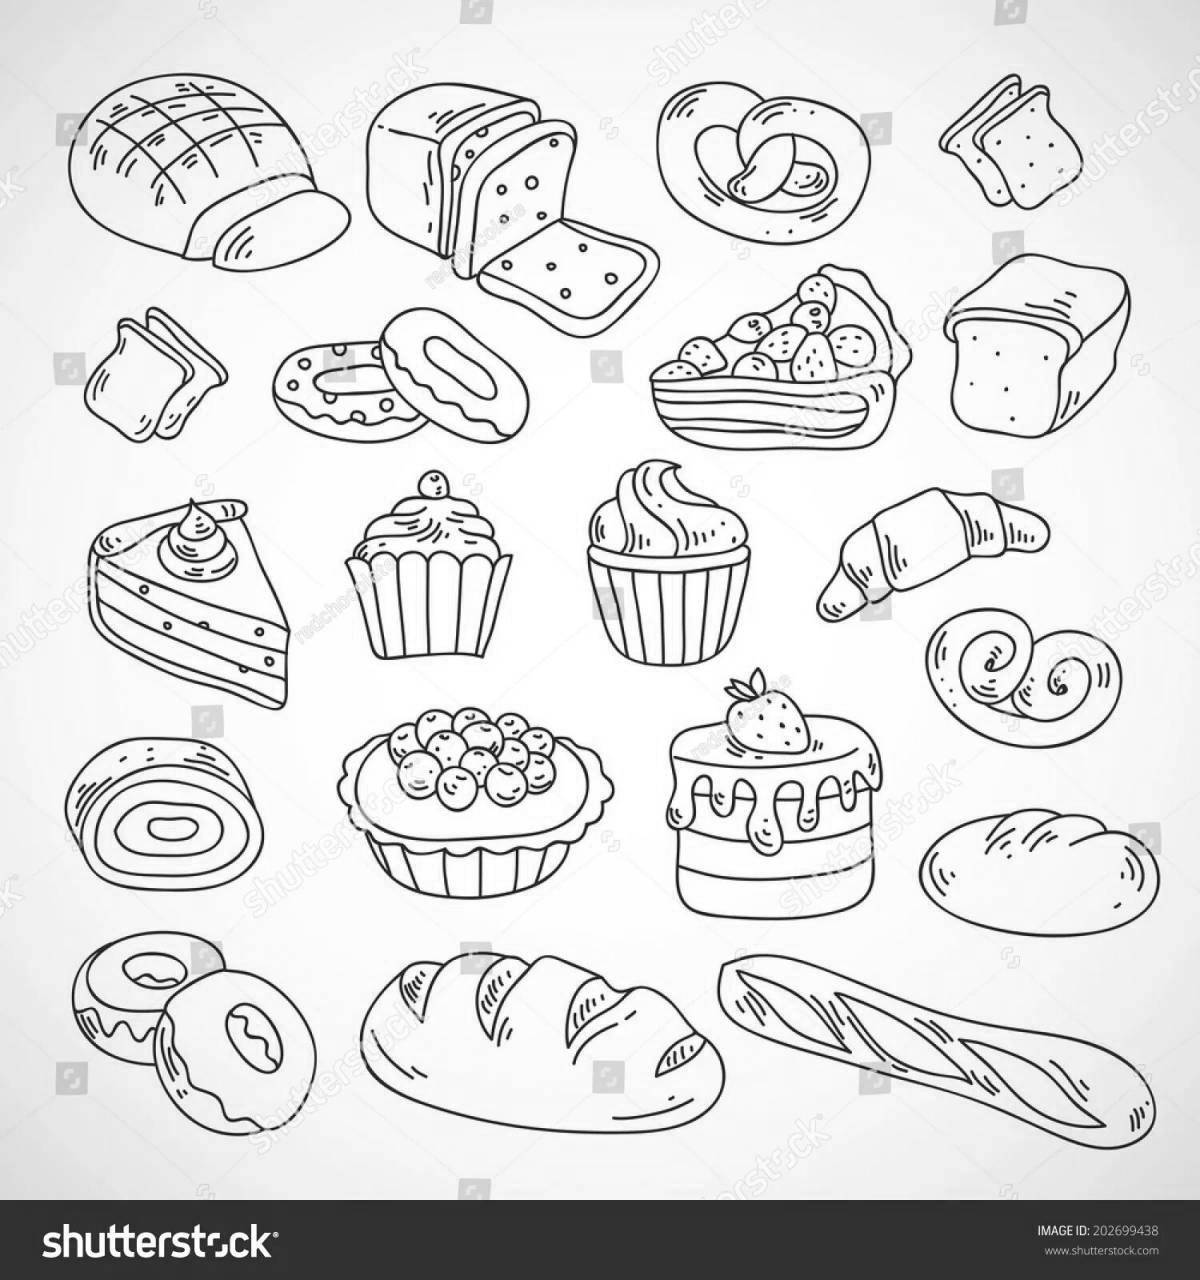 Delicious pastry coloring page